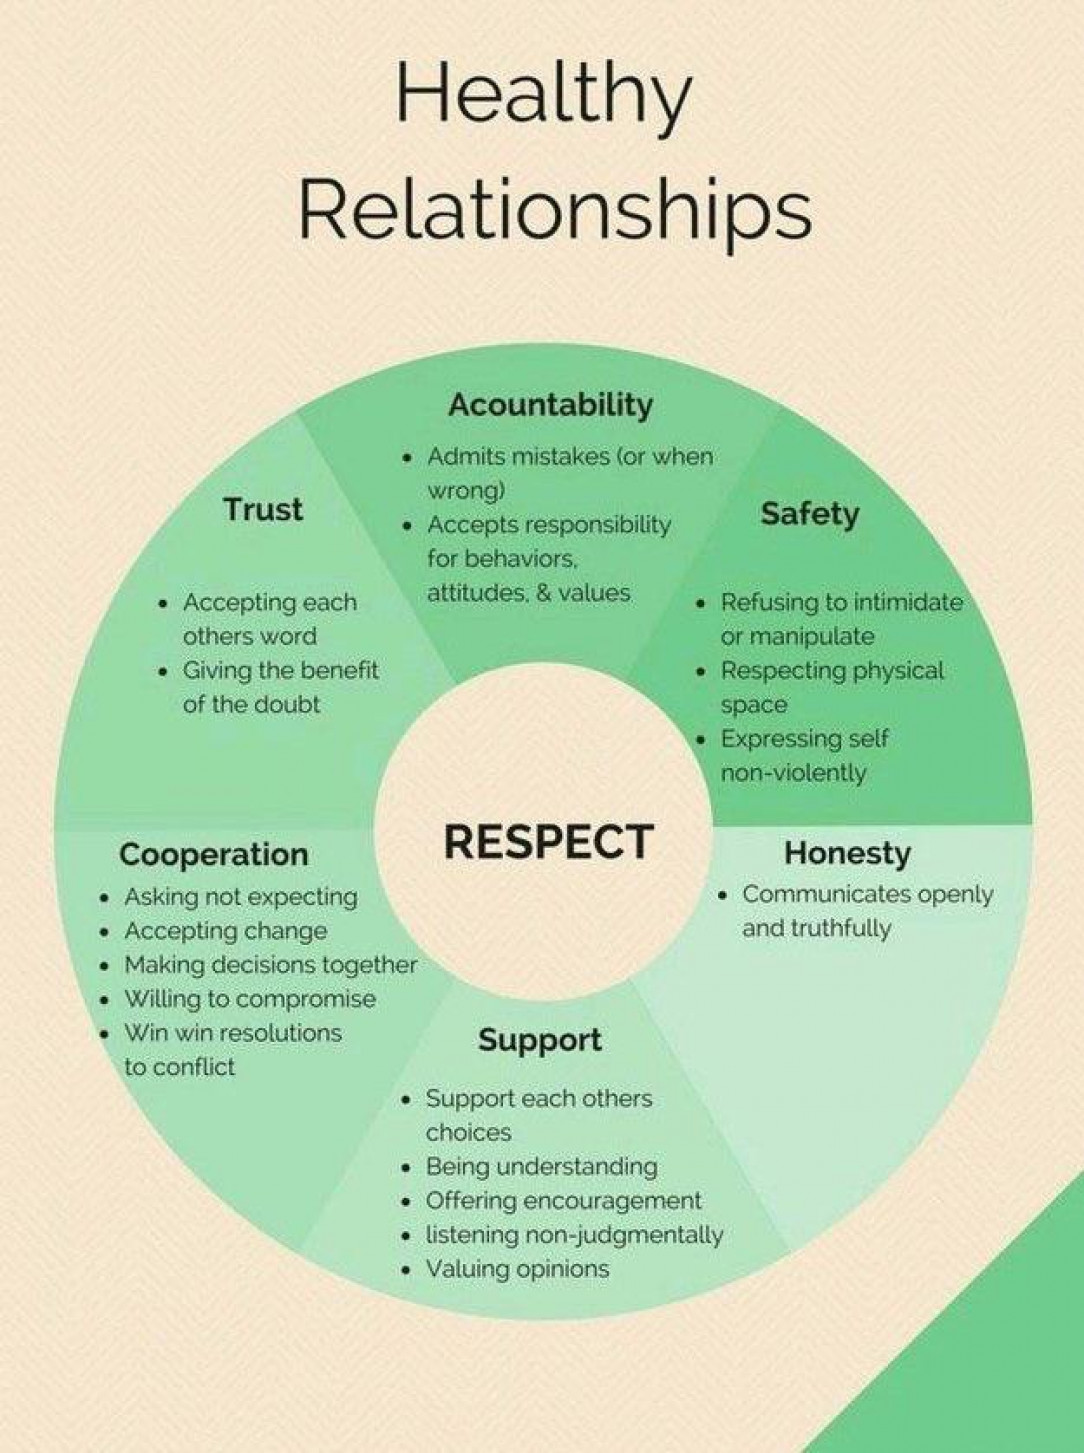 If you’ve only had examples of toxic relationships, this can be a good tool to contrast that to